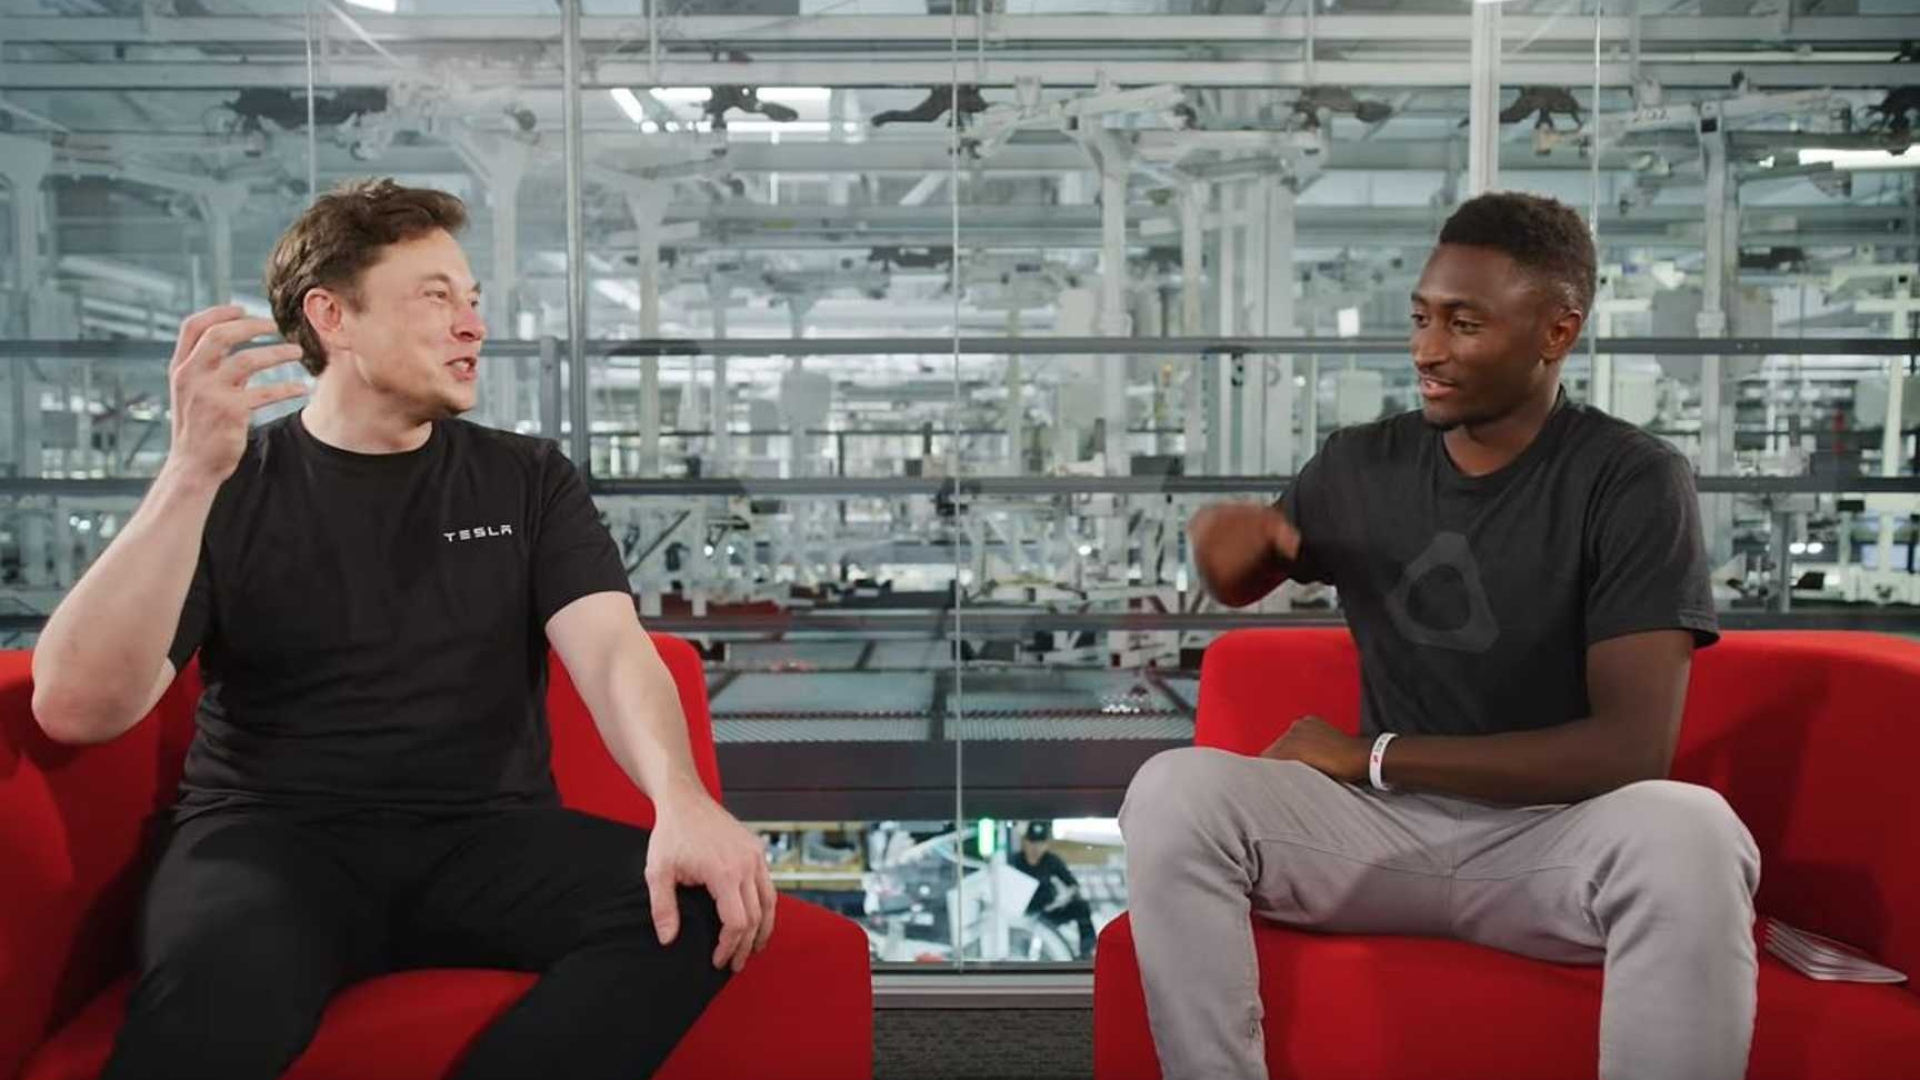 Marques Brownlee, Elon Musk interview, Future car discussions, Technological advancements, 1920x1080 Full HD Desktop